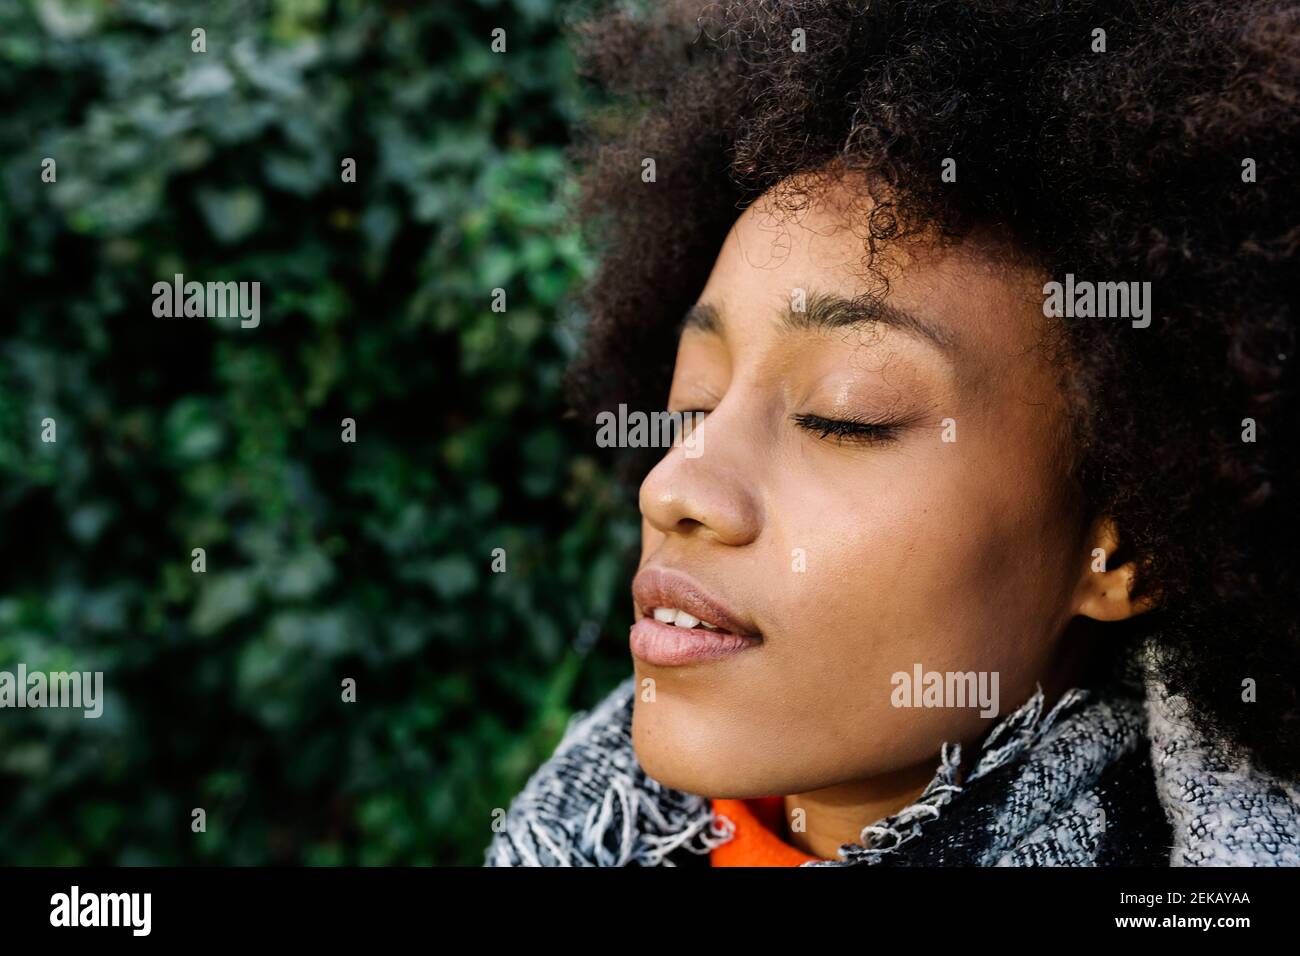 Afro young woman with eyes closed in sunlight Stock Photo